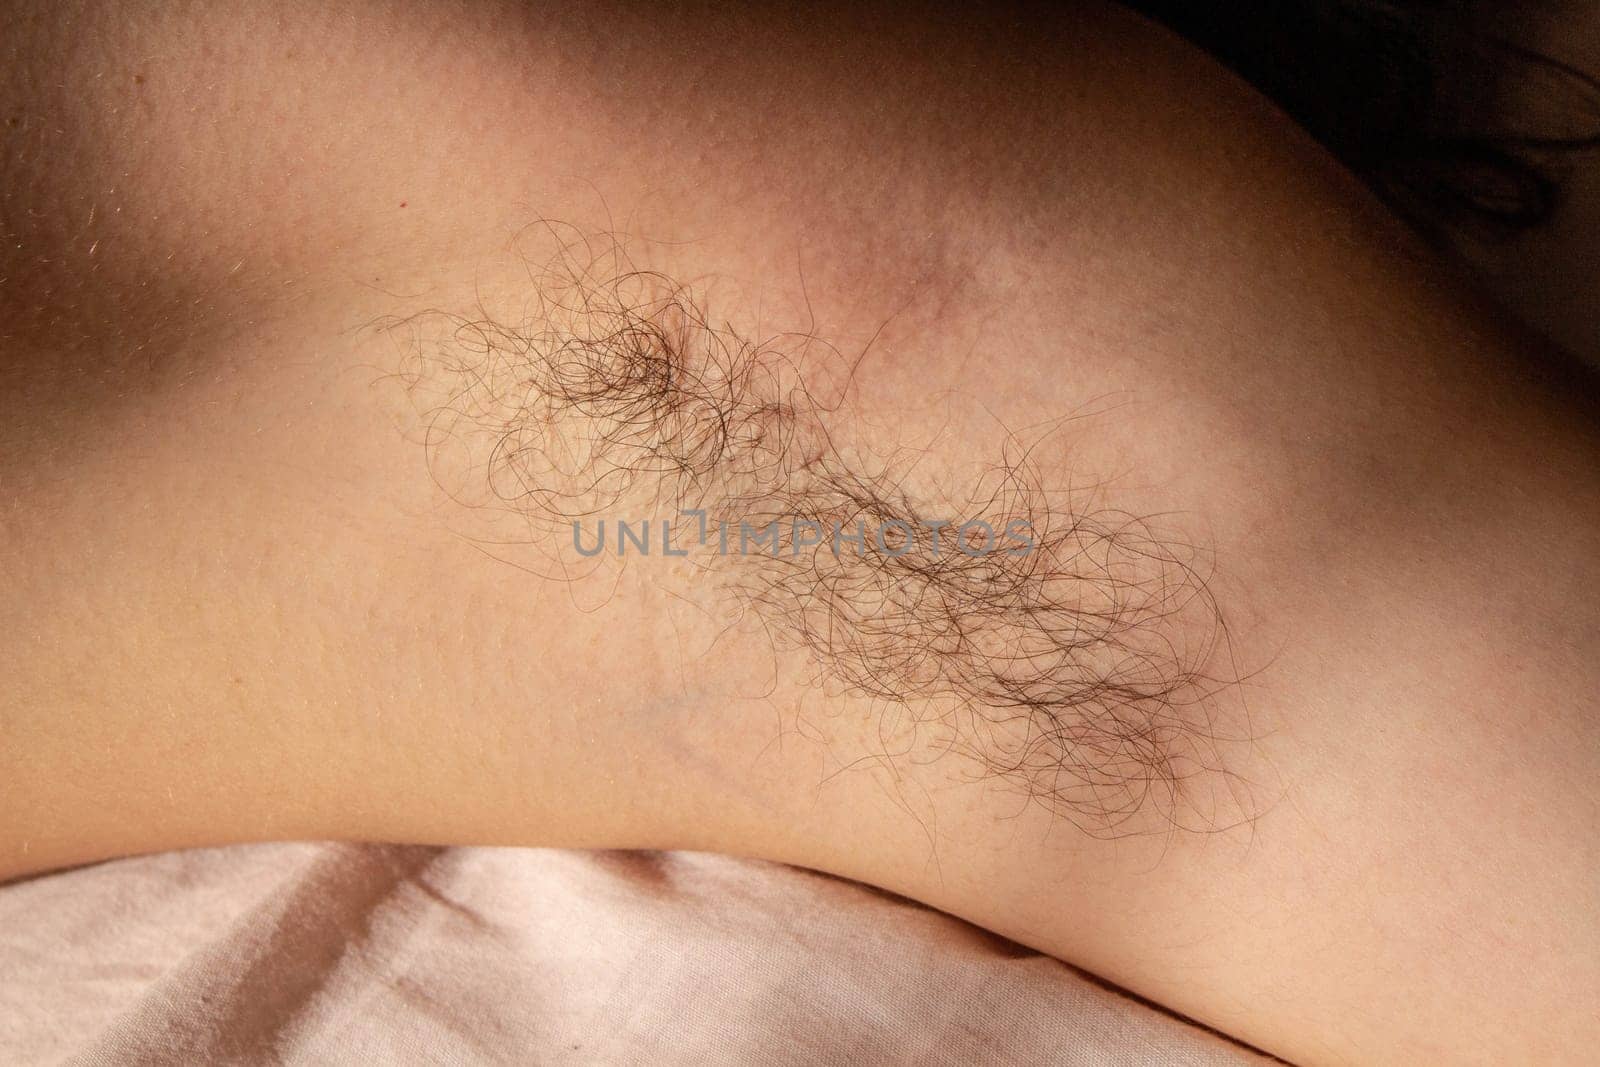 Challenge beauty standards and celebrate natural authenticity with this empowering image of a female armpit adorned with hair